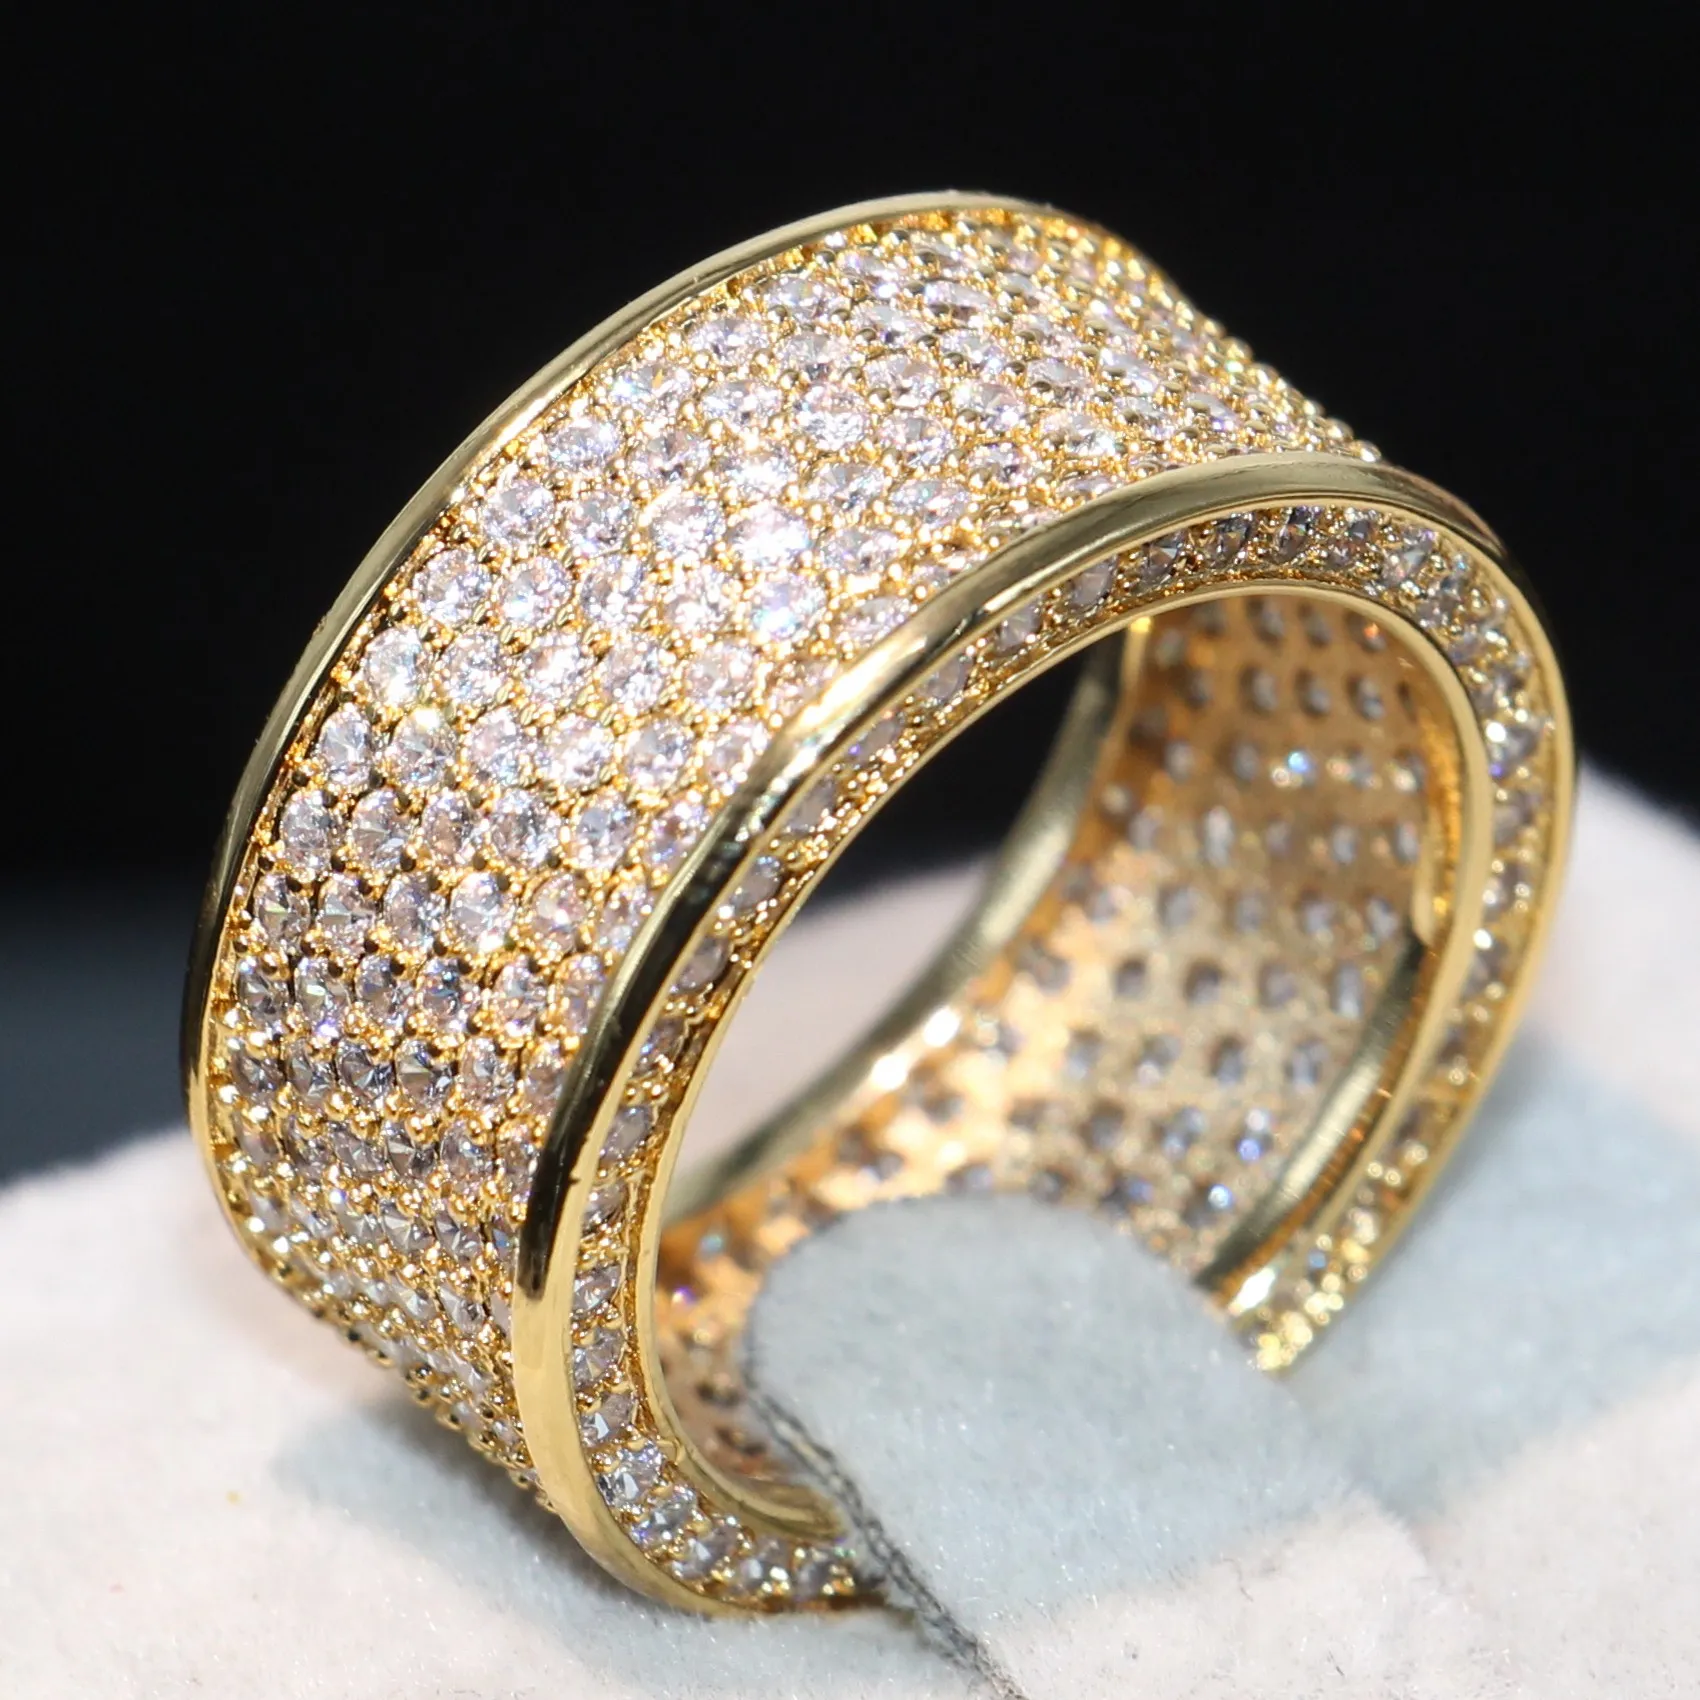 Stunning Brand Desgin High Quality Luxury Jewelry 925 Sterling Silver&Yellow Gold Filled Pave Enternity Topaz CZ Diamond Circle Band Ring